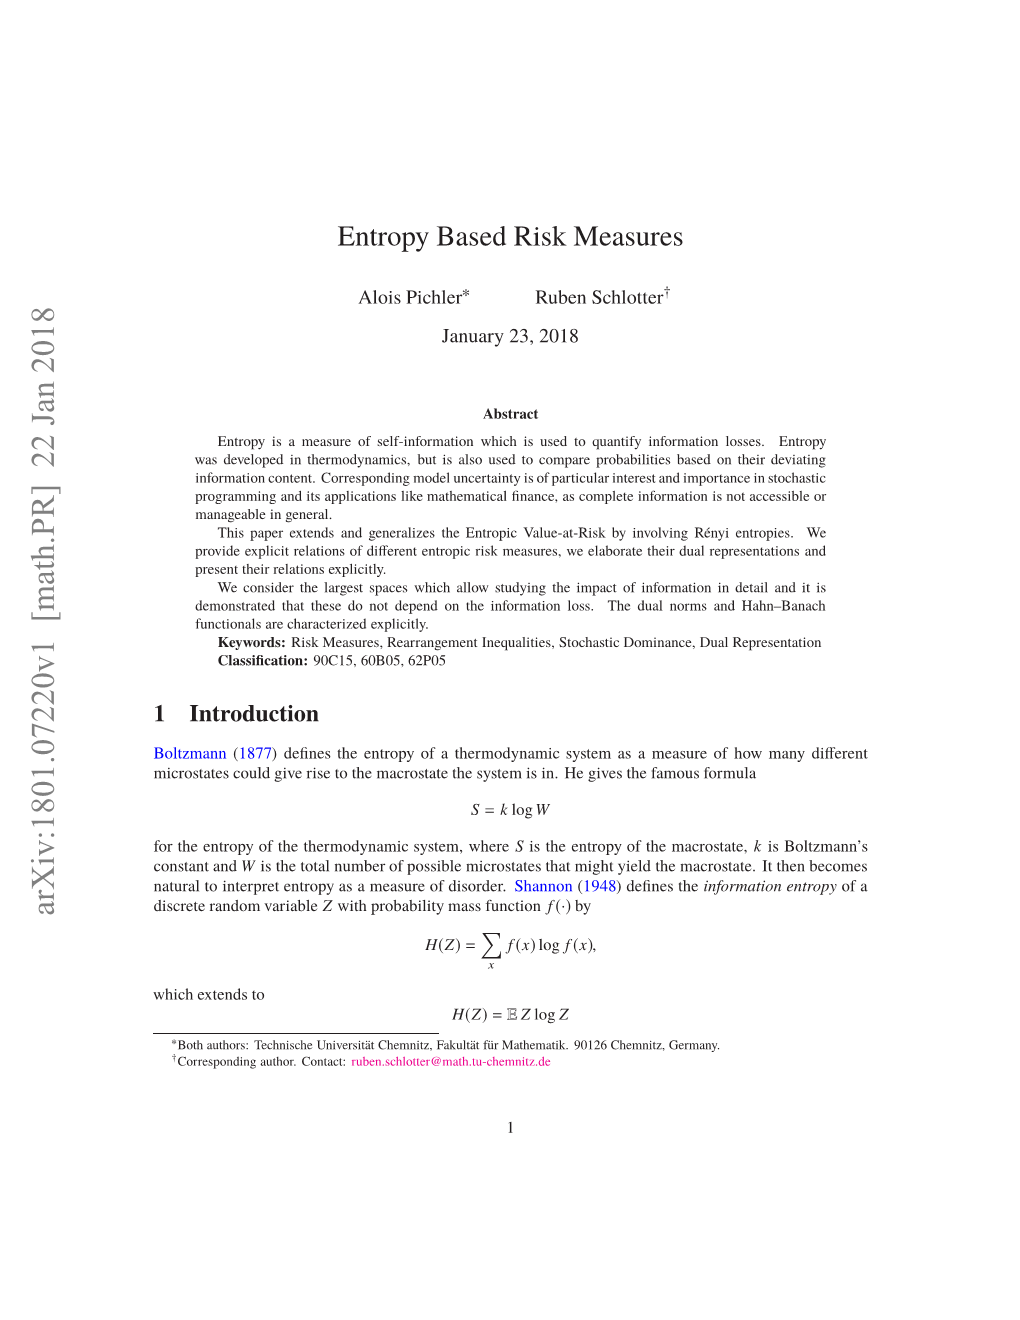 Entropy Based Risk Measures Interpolates the Average Value-At-Risk and the Classical Entropic Value-At-Risk